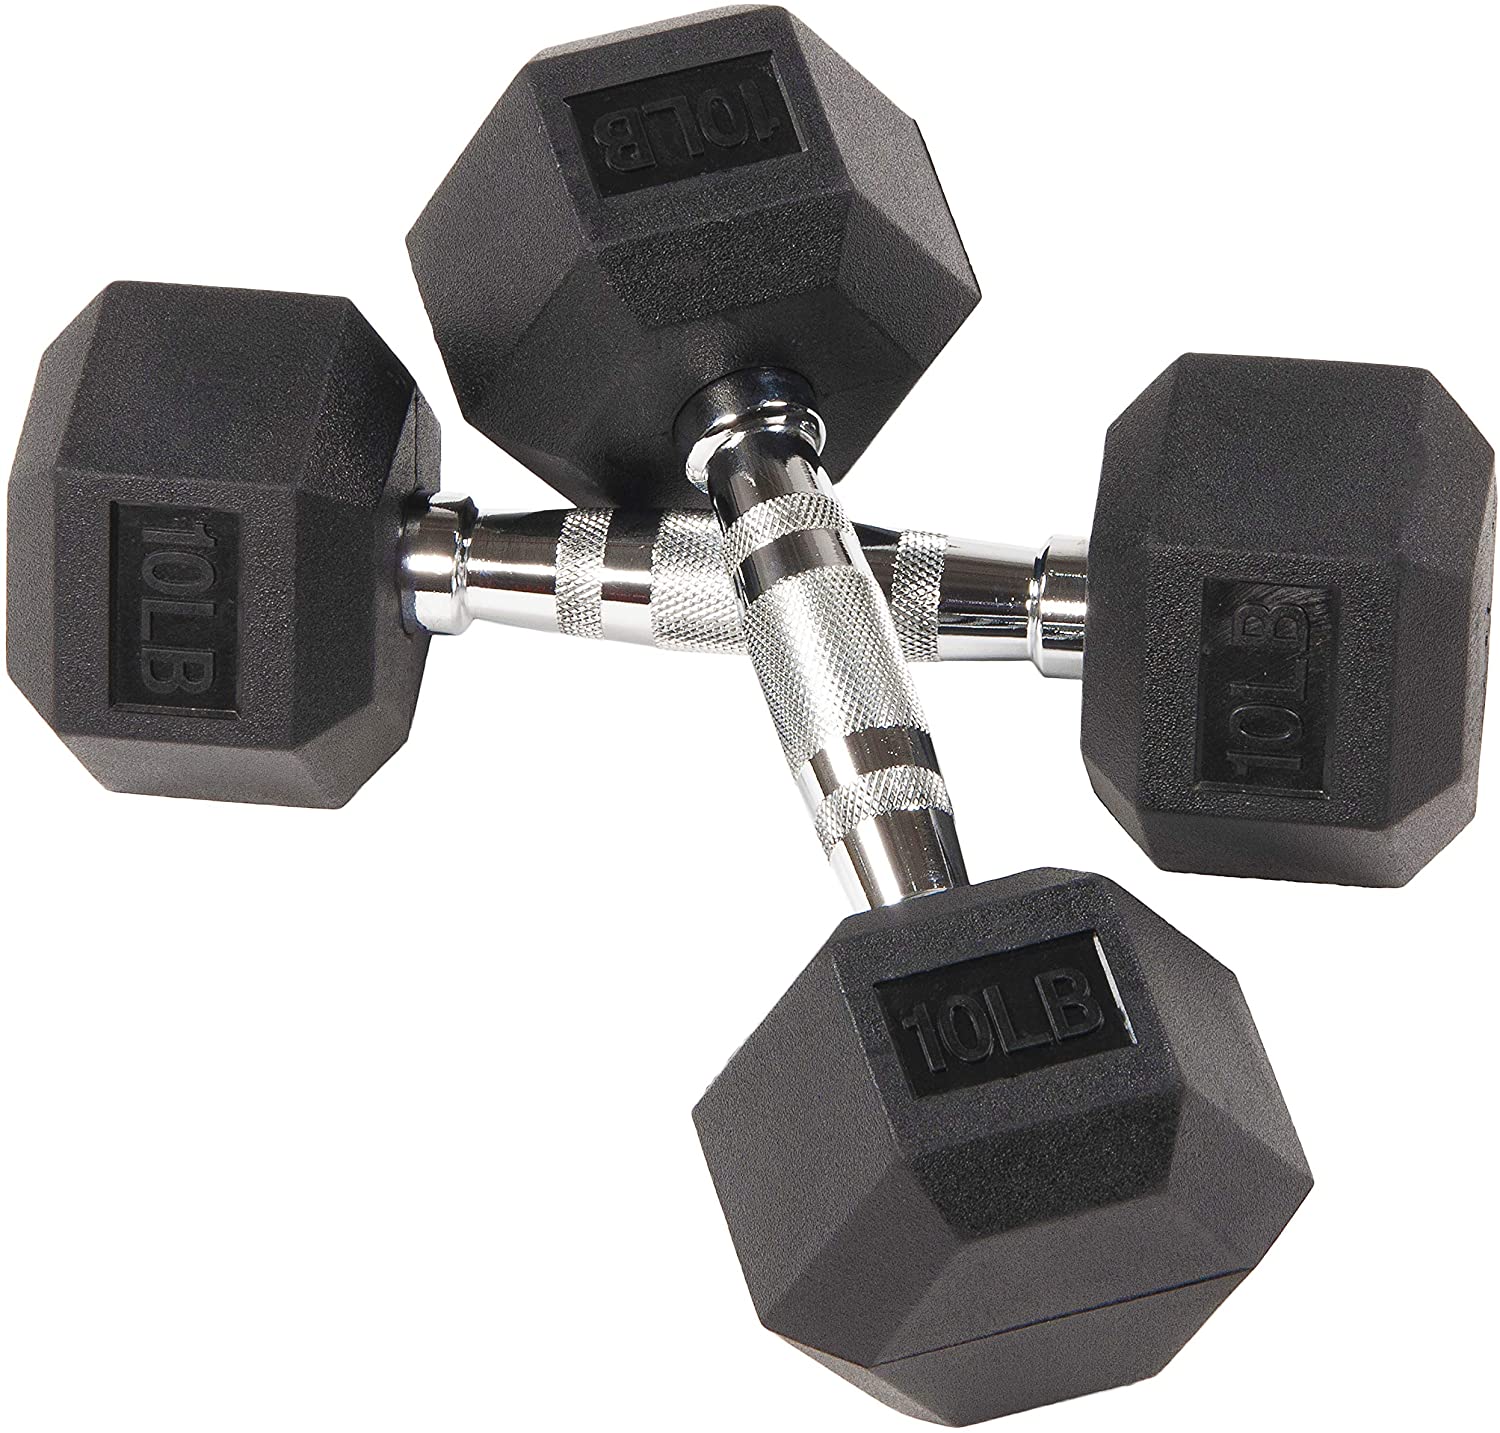 10-Lbs Sporzon! Rubber Encased Hex Dumbbell (Pair) $25.70 + Free Shipping